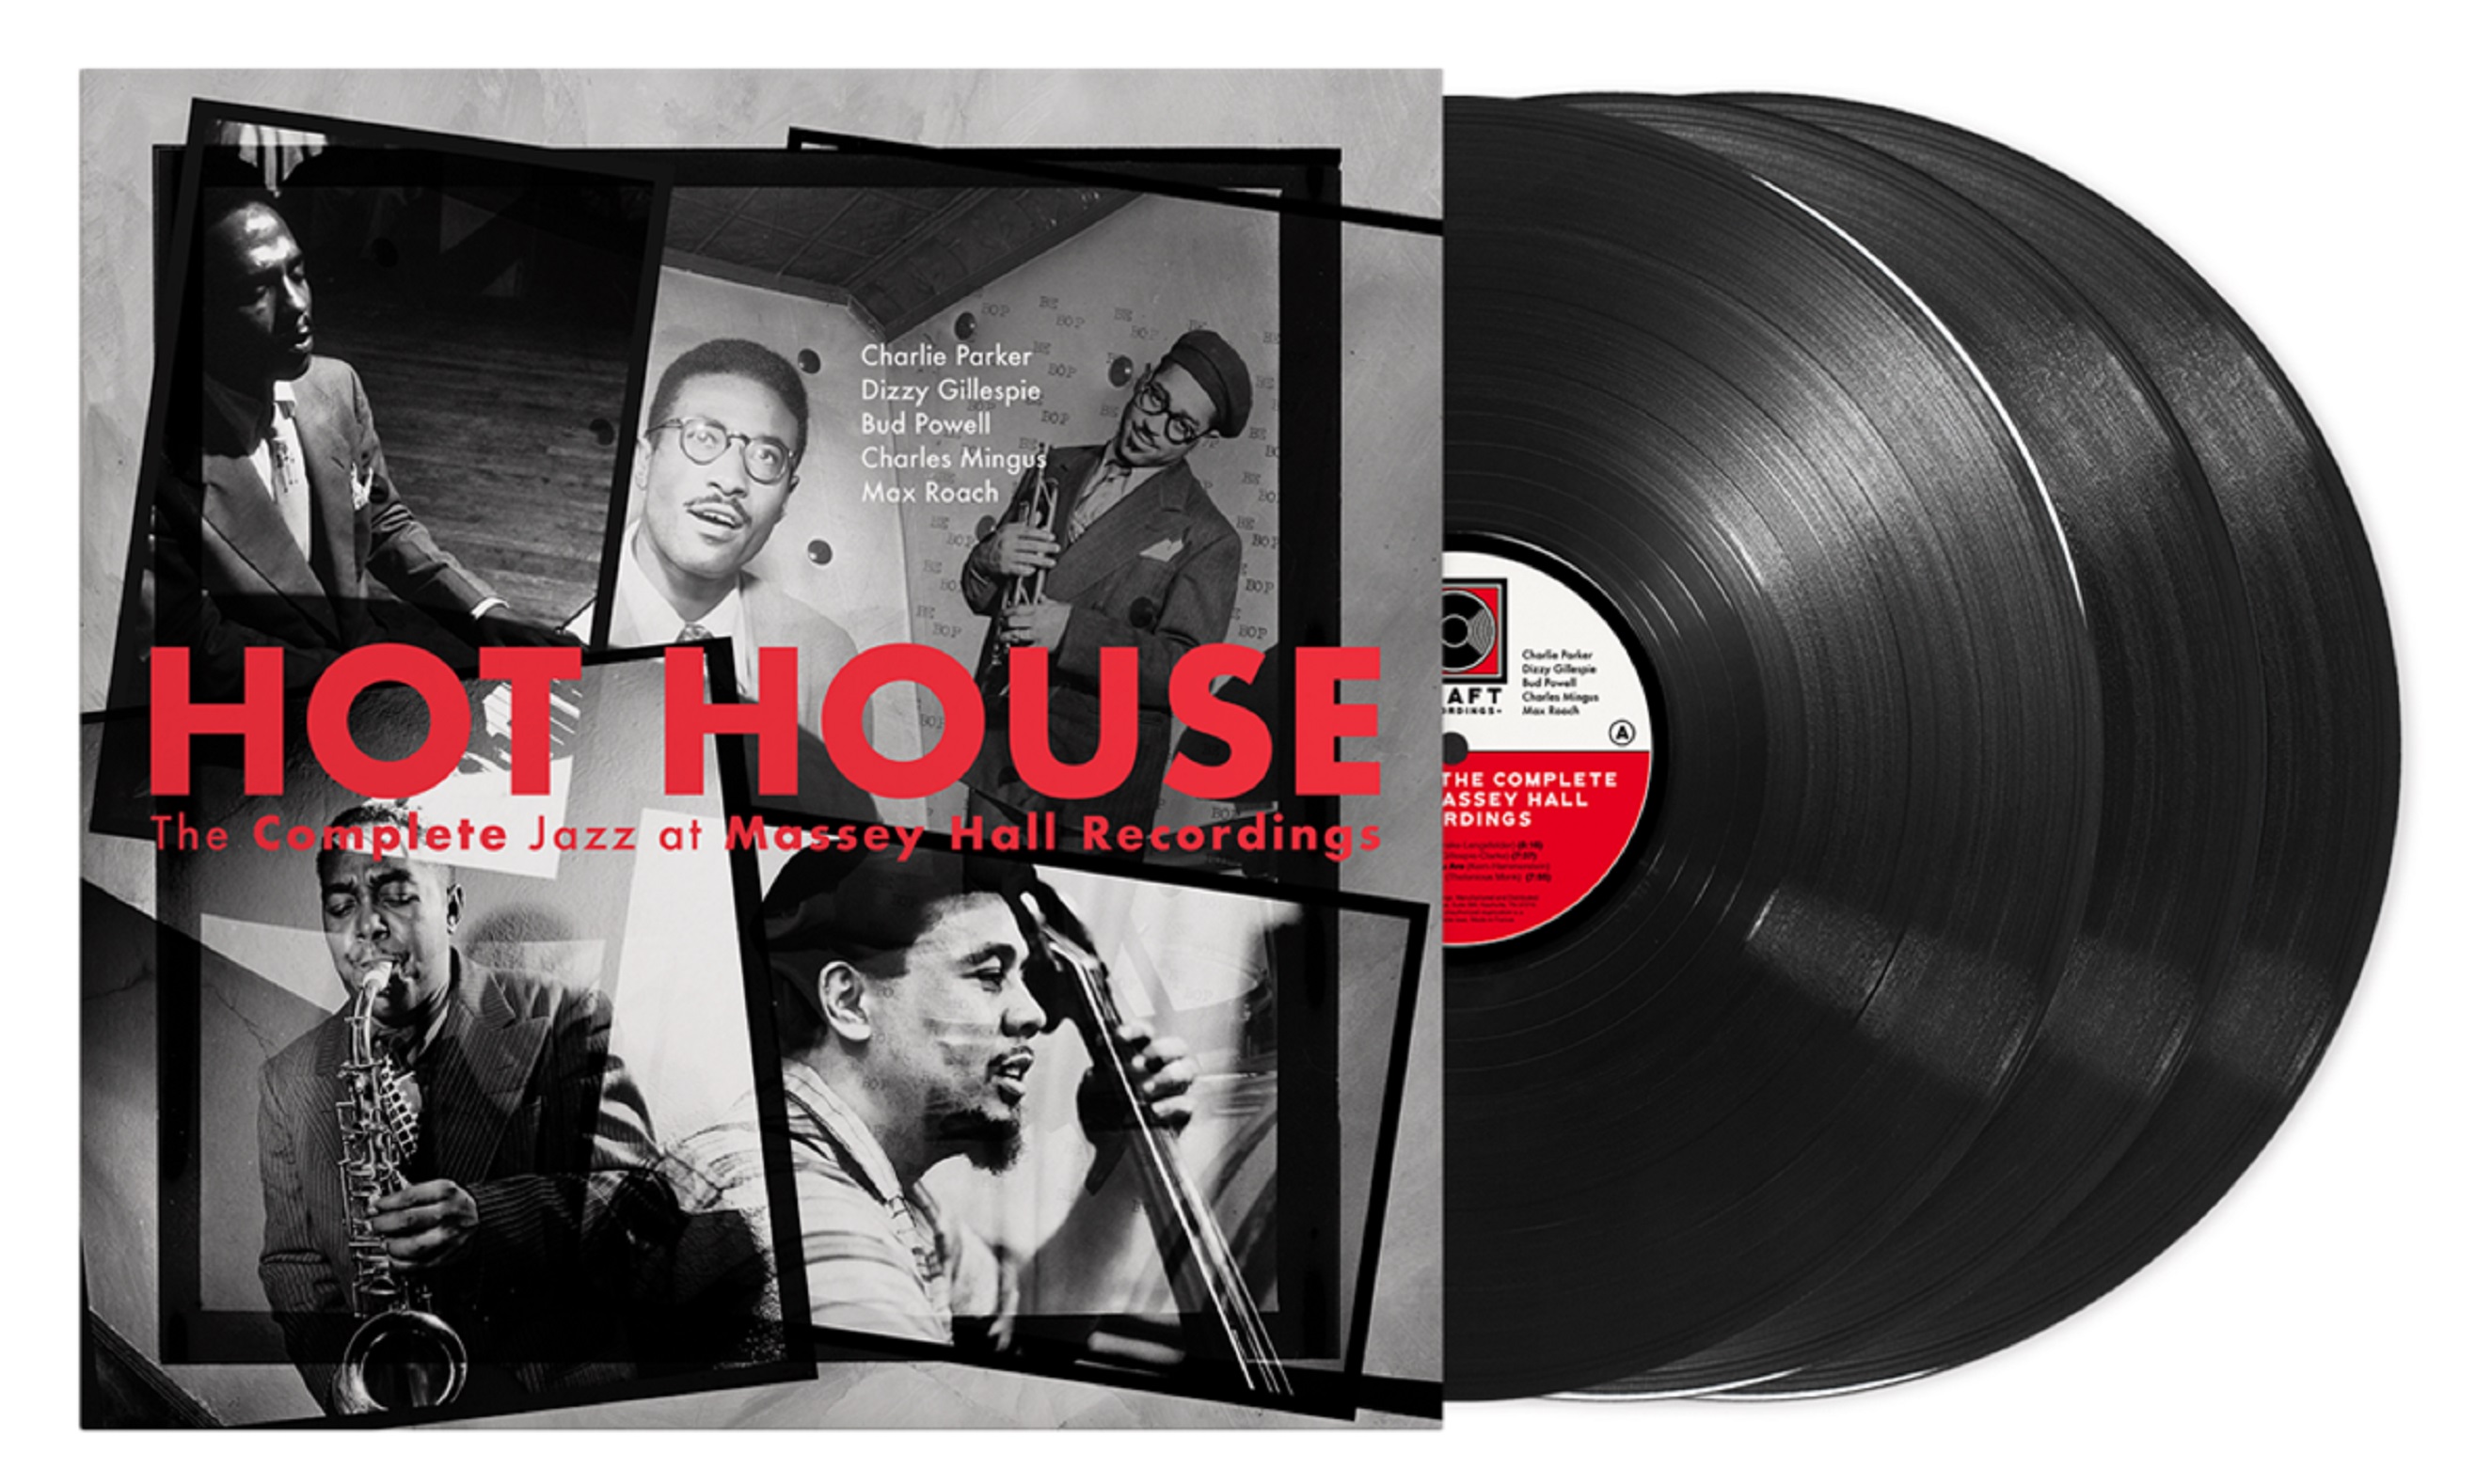 Craft Recordings celebrates 70th anniv. of “The Greatest Jazz Concert Ever” with ‘Hot House: The Complete Jazz at Massey Hall Recordings’